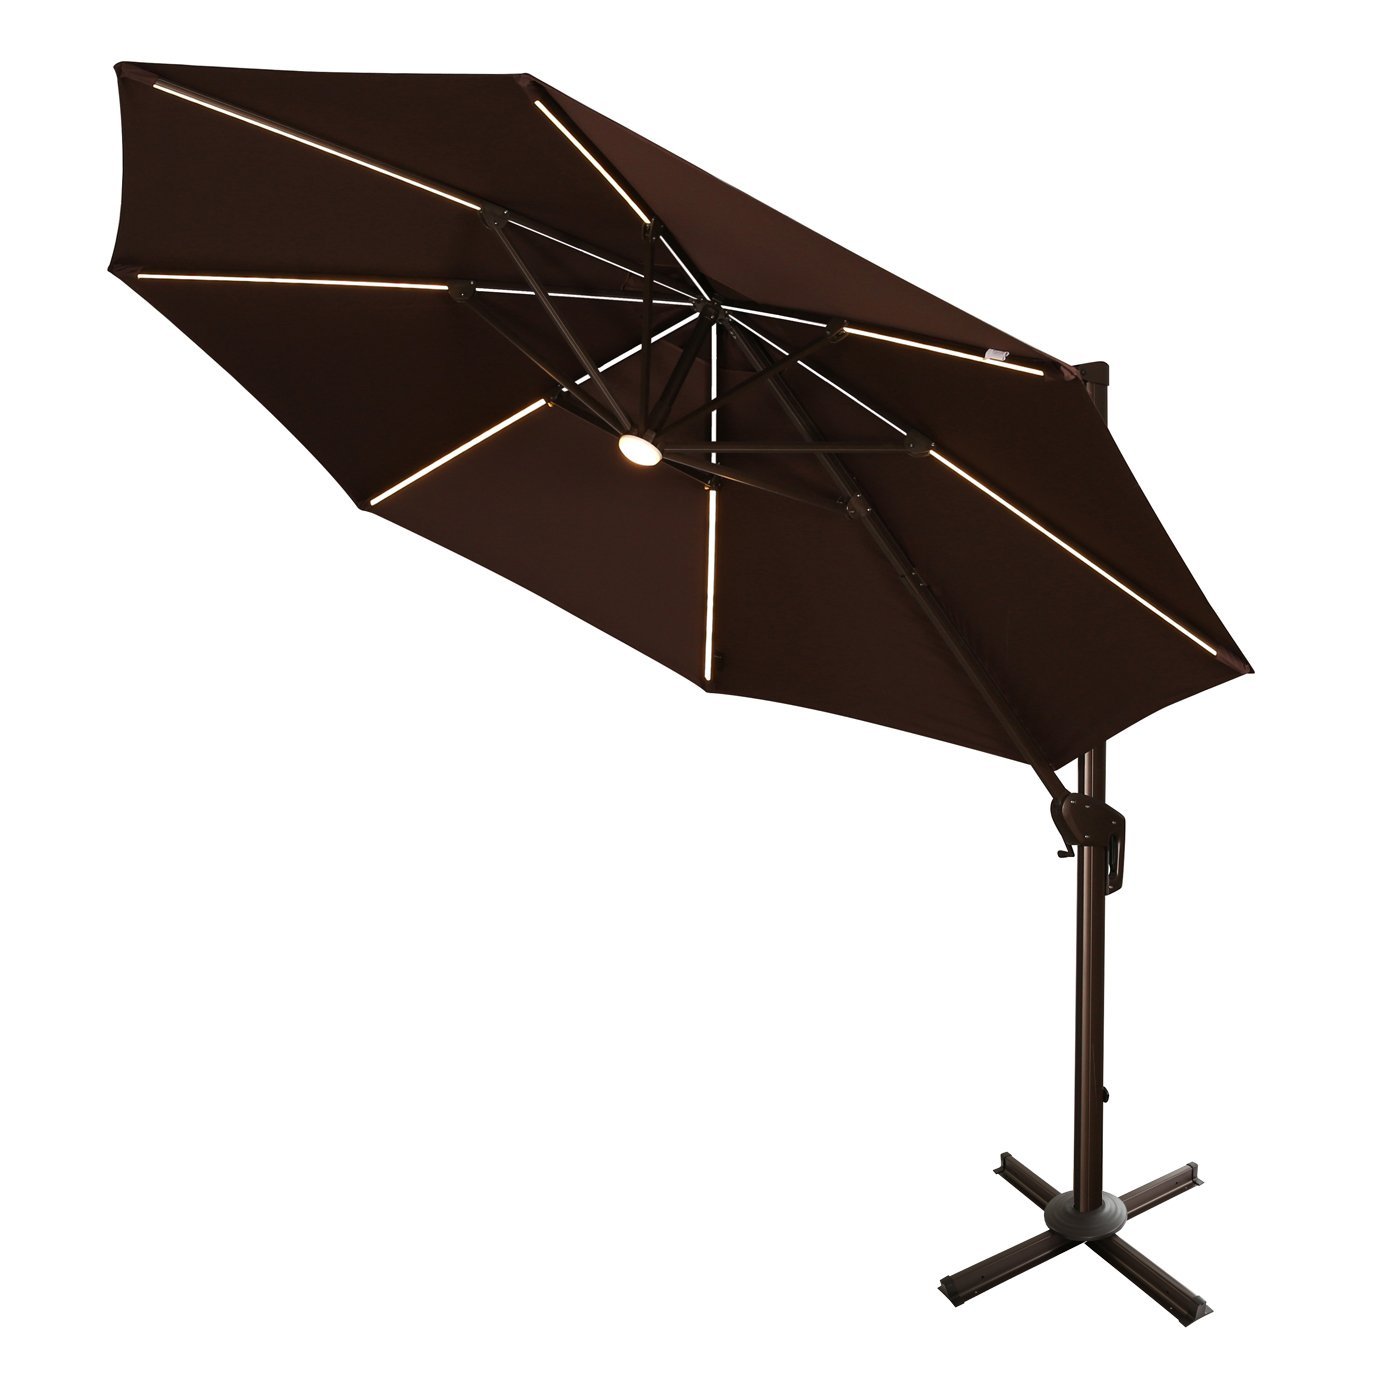 Ulax furniture 360 degree Rotation 11 Ft Deluxe Solar Powered LED Lights Outdoor Offset Hanging Market Umbrella